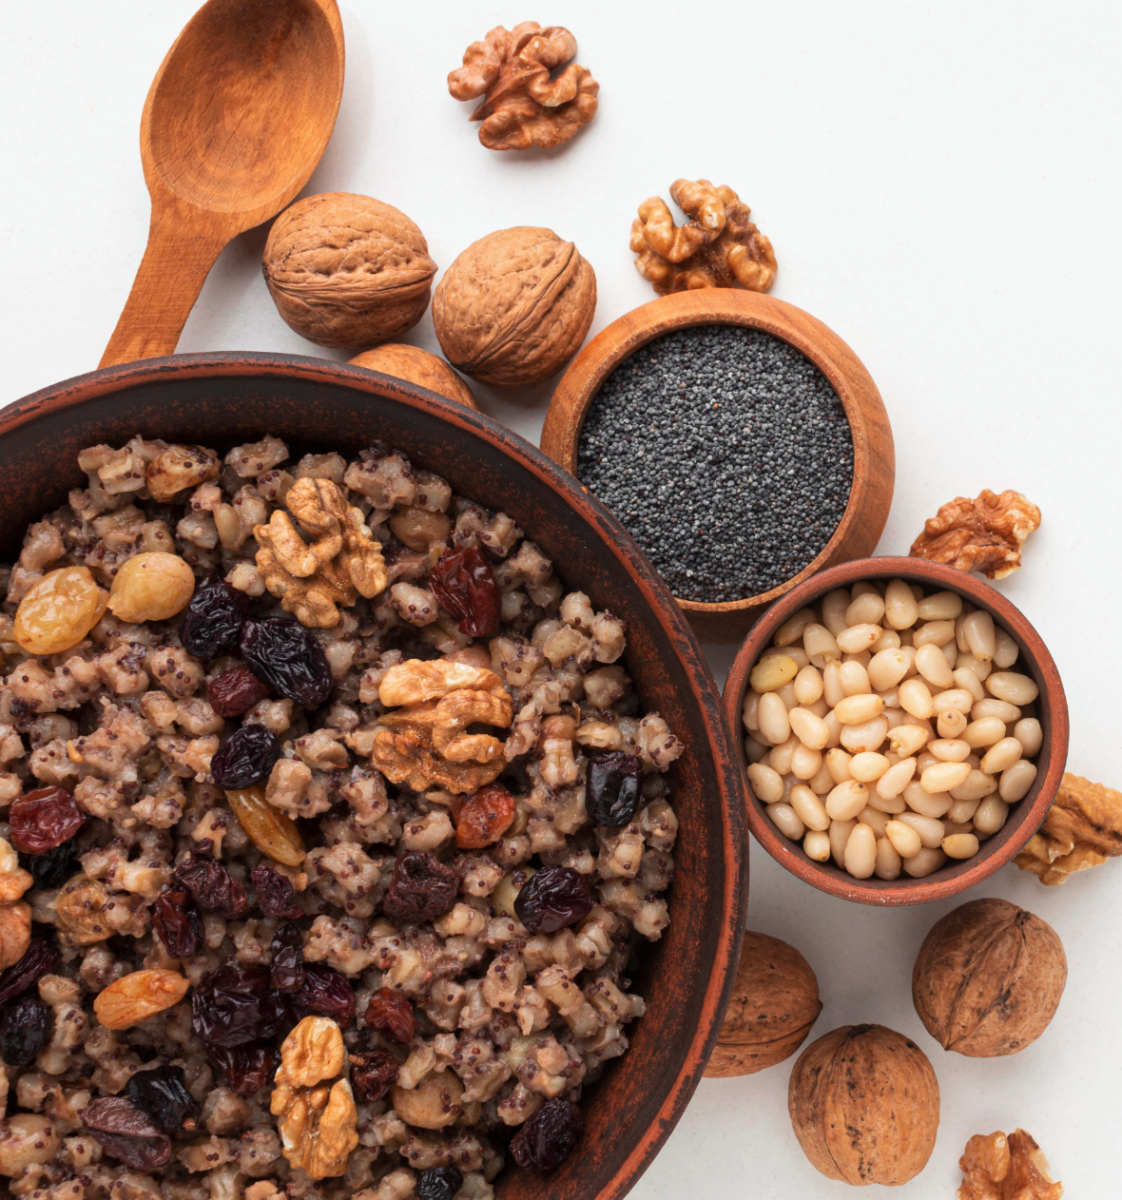 The Healthiest Nuts and Seeds You Can Eat